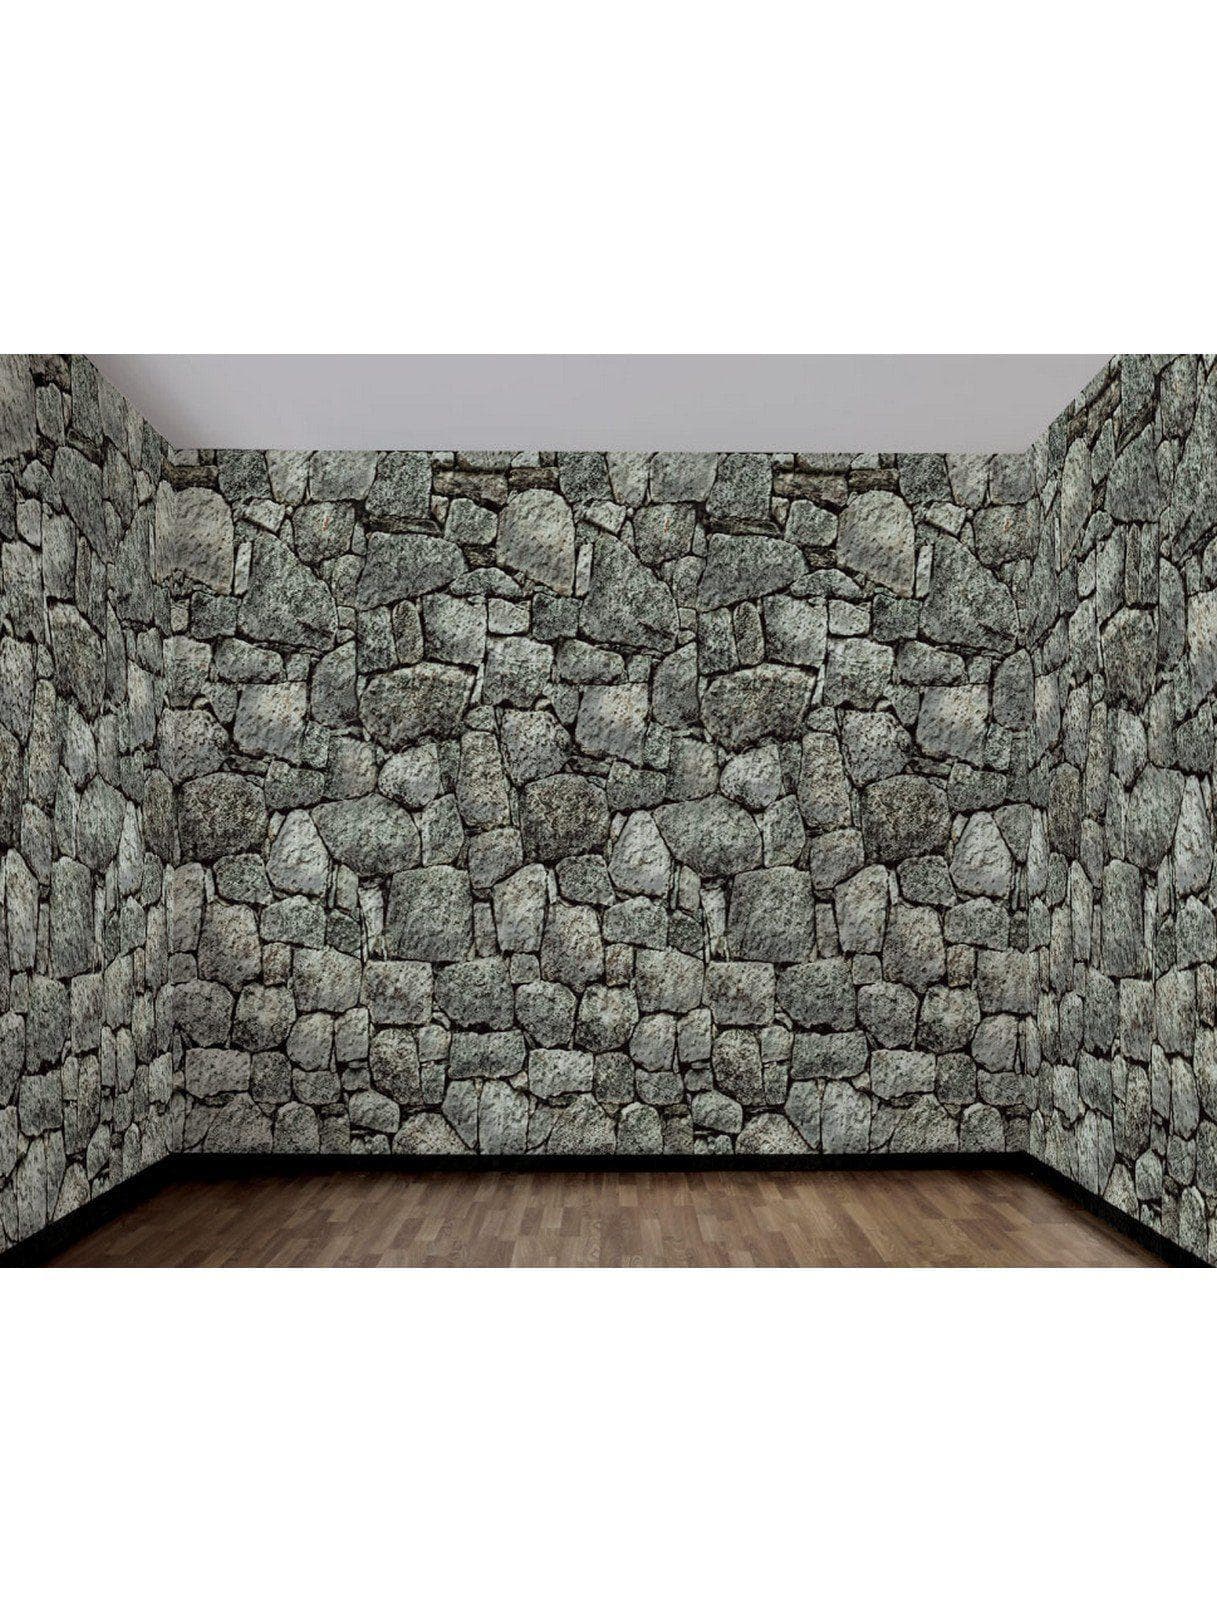 Dungeon Decor Stone Wall Backdrop - costumes.com